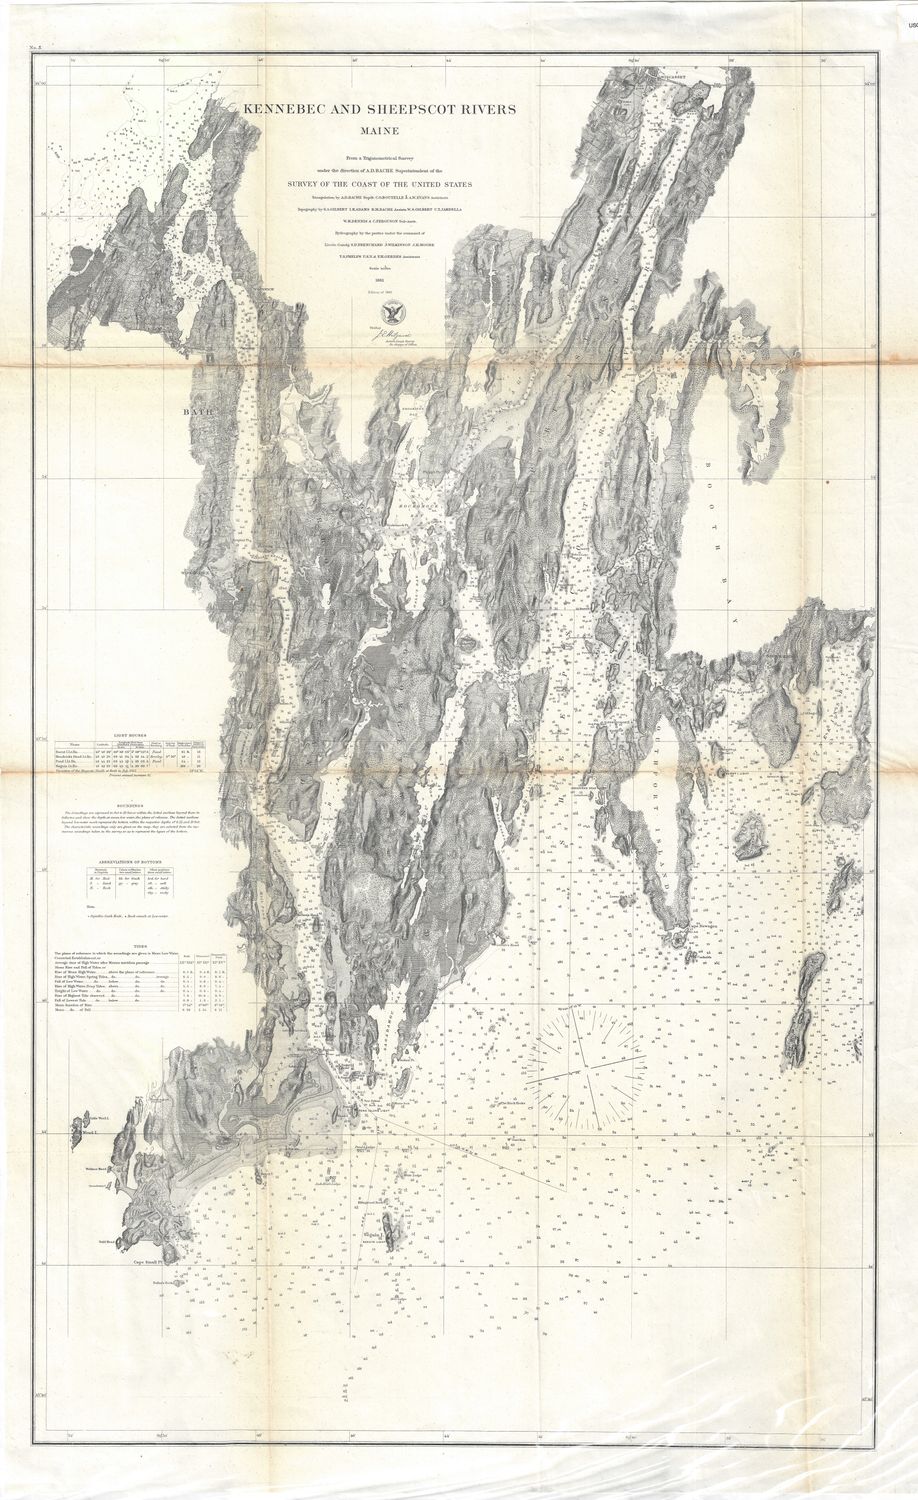 1862 Kennebec Sheepscot Rivers ME by the USCS as a Folding Folio in Lithography, as Congressional Documents